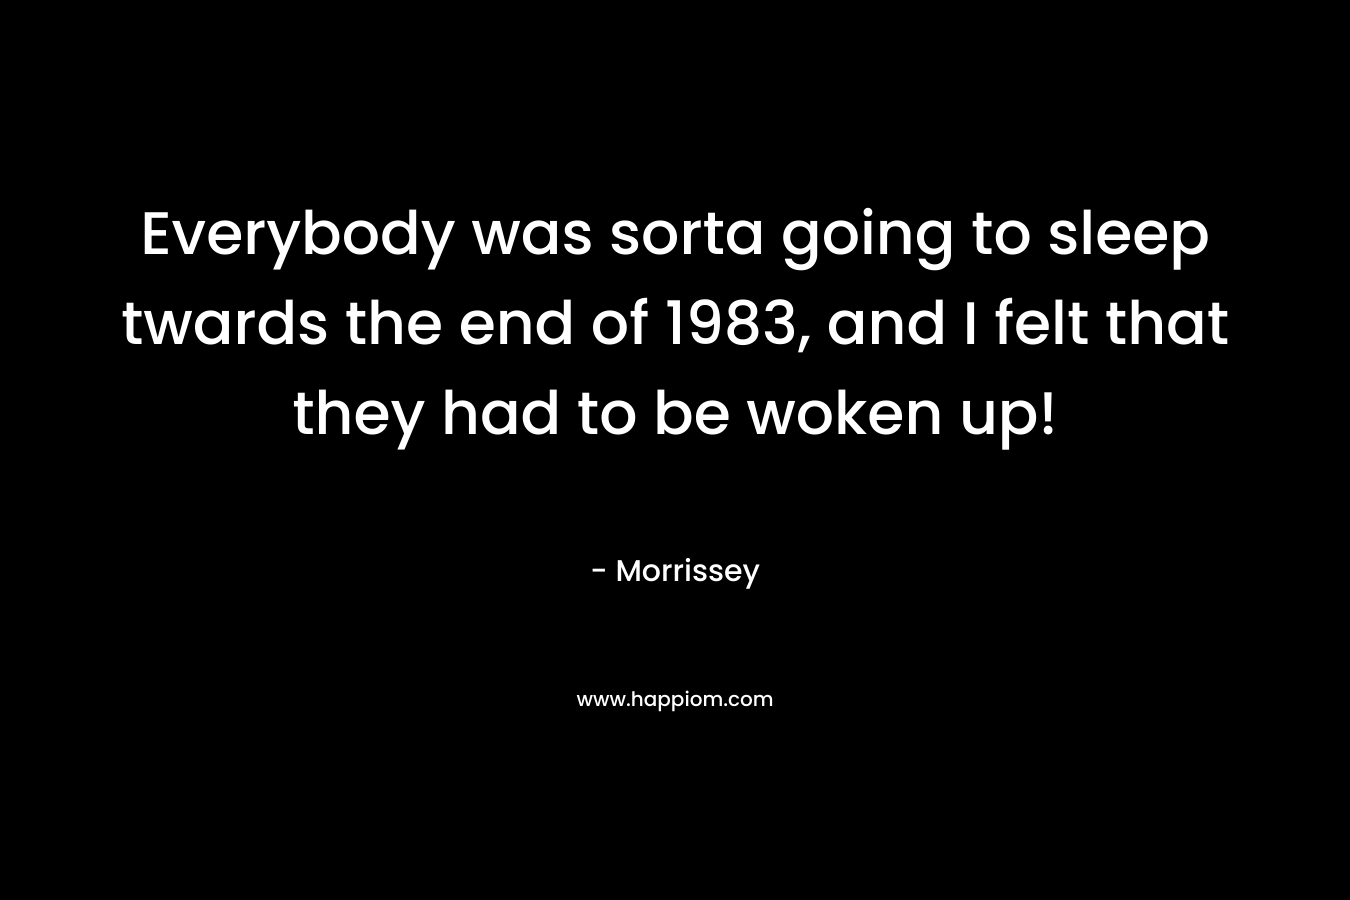 Everybody was sorta going to sleep twards the end of 1983, and I felt that they had to be woken up! – Morrissey